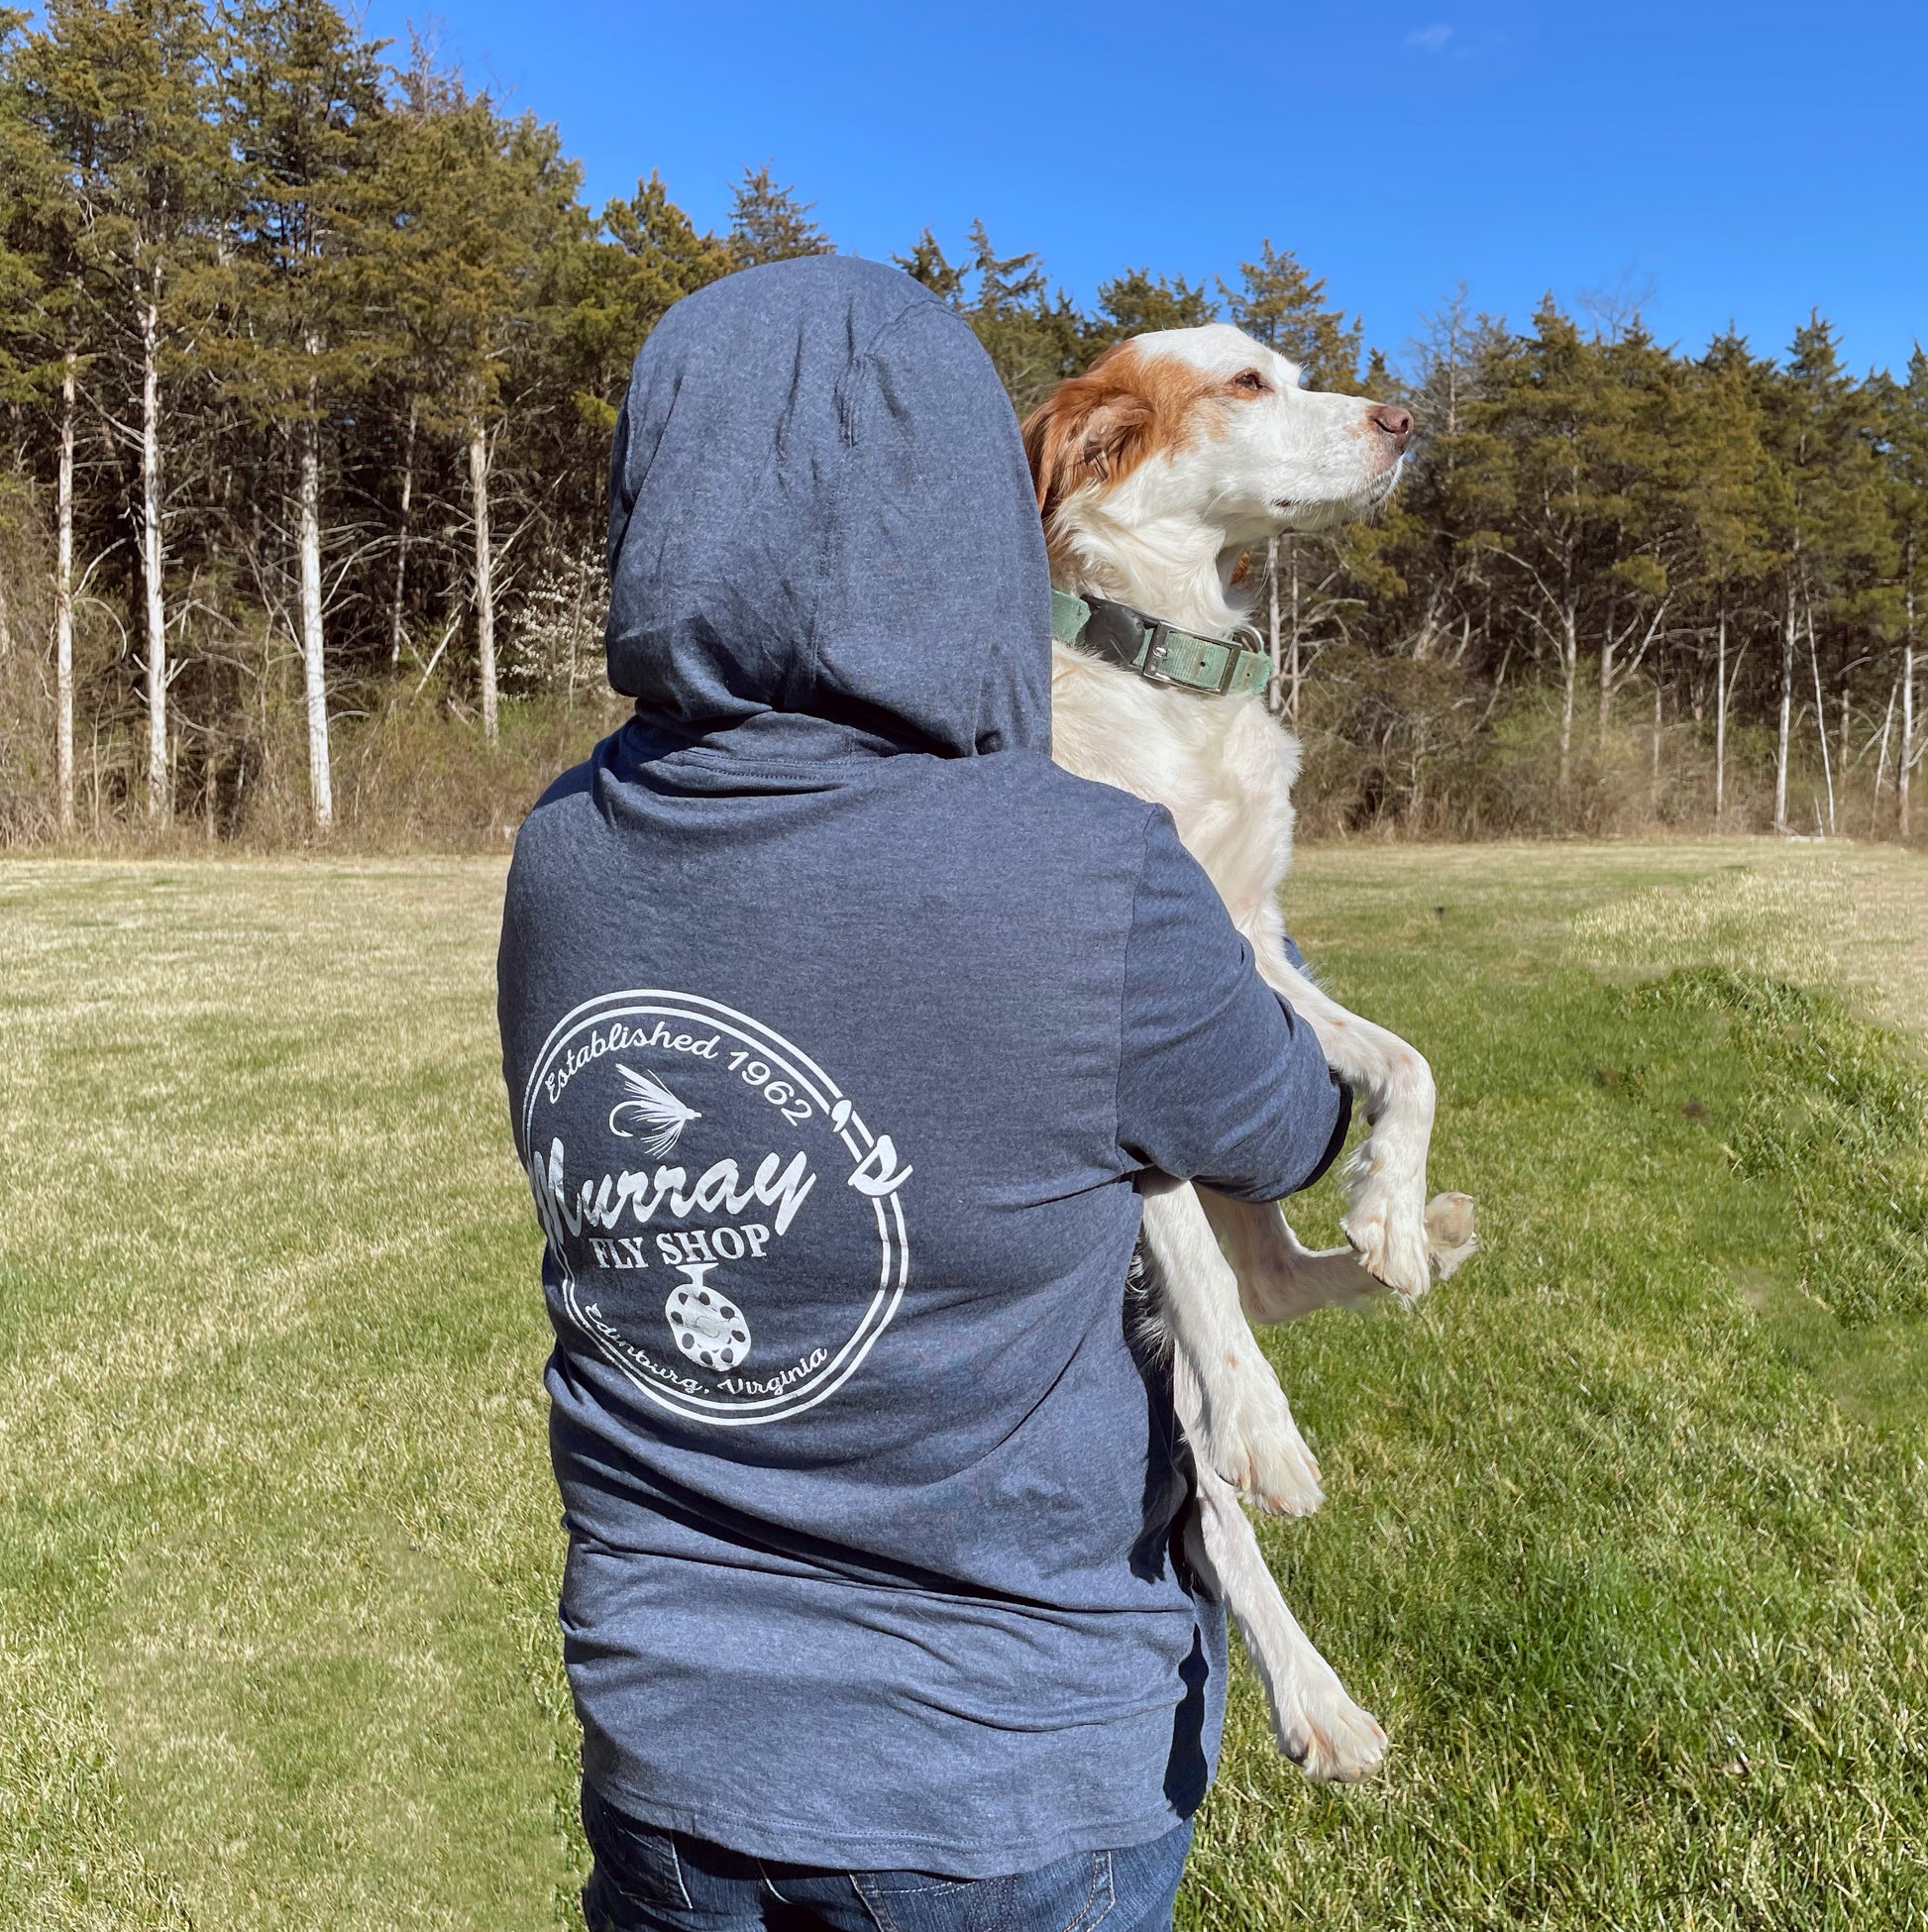 Hooded sun shirt with a Murray's Fly Shop logo on the back.  Girl has the hood up and is holding a Brittany spaniel dog